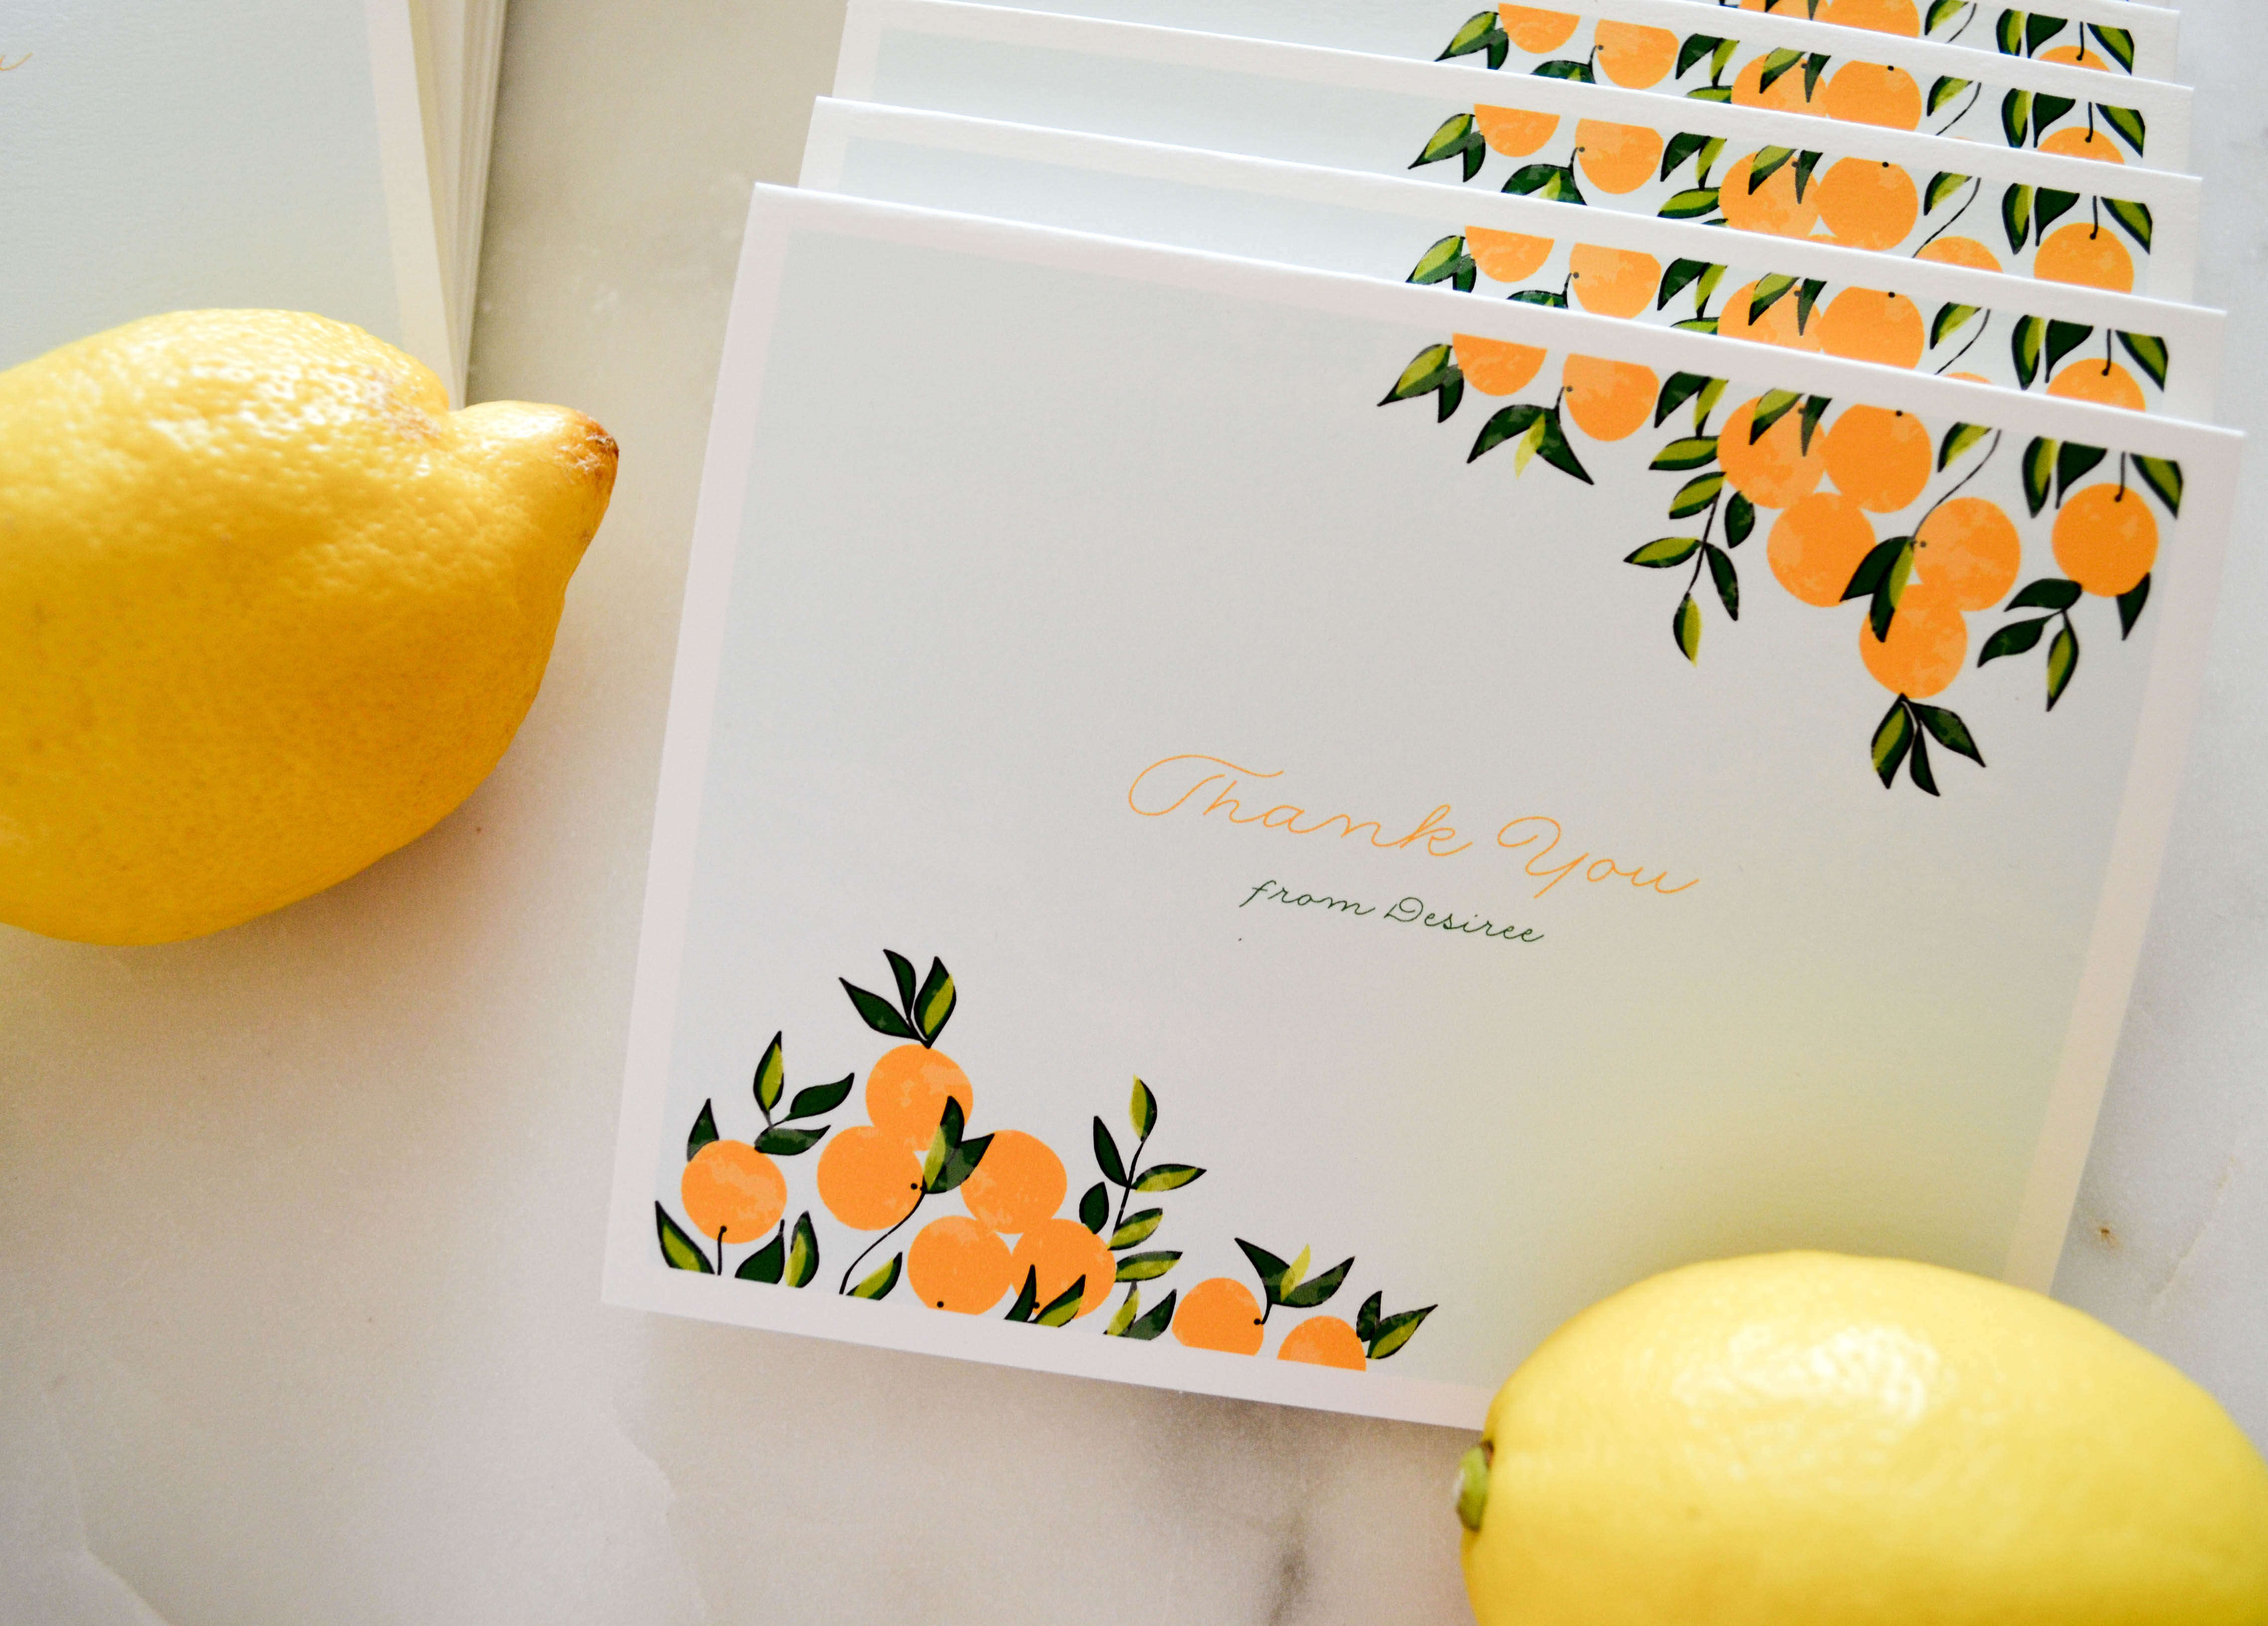 Beautifully Seaside's pretty business cards and stationery with Minted